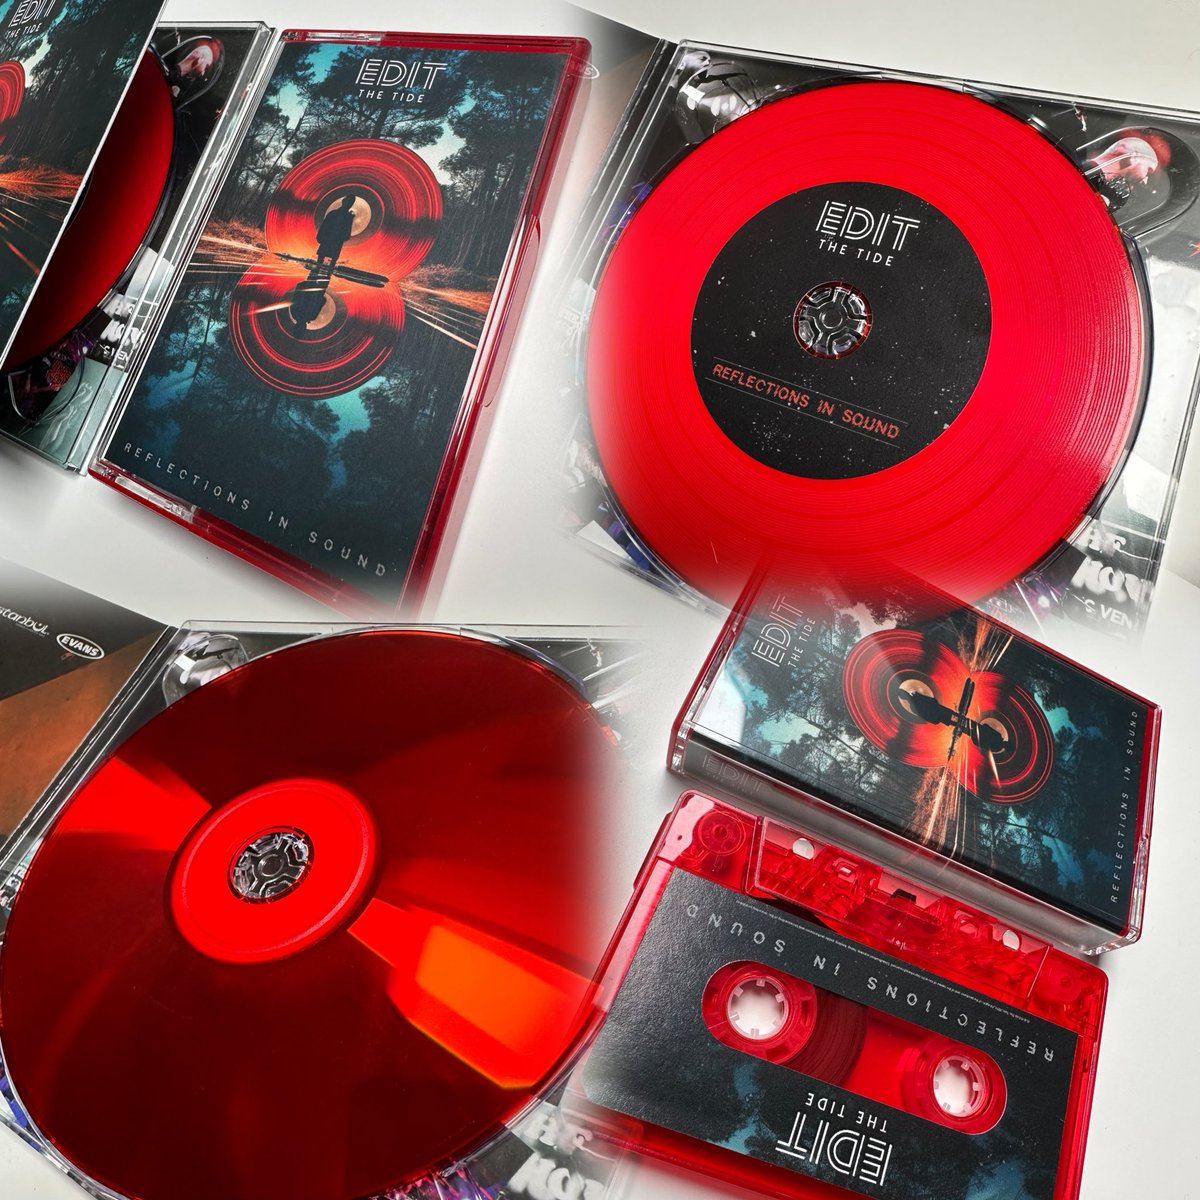 MERCH HAS BEEN DELIVERED! 🔴🙌🏻 We are so happy with how these have come out! CDs are hand numbered to 50 and on these really cool red vinyl-effect CDs 💿 Cassettes are limited to 20 copies and are clear red! 📼 Pick up a copy from our Merch store : editthetide.myshopify.com